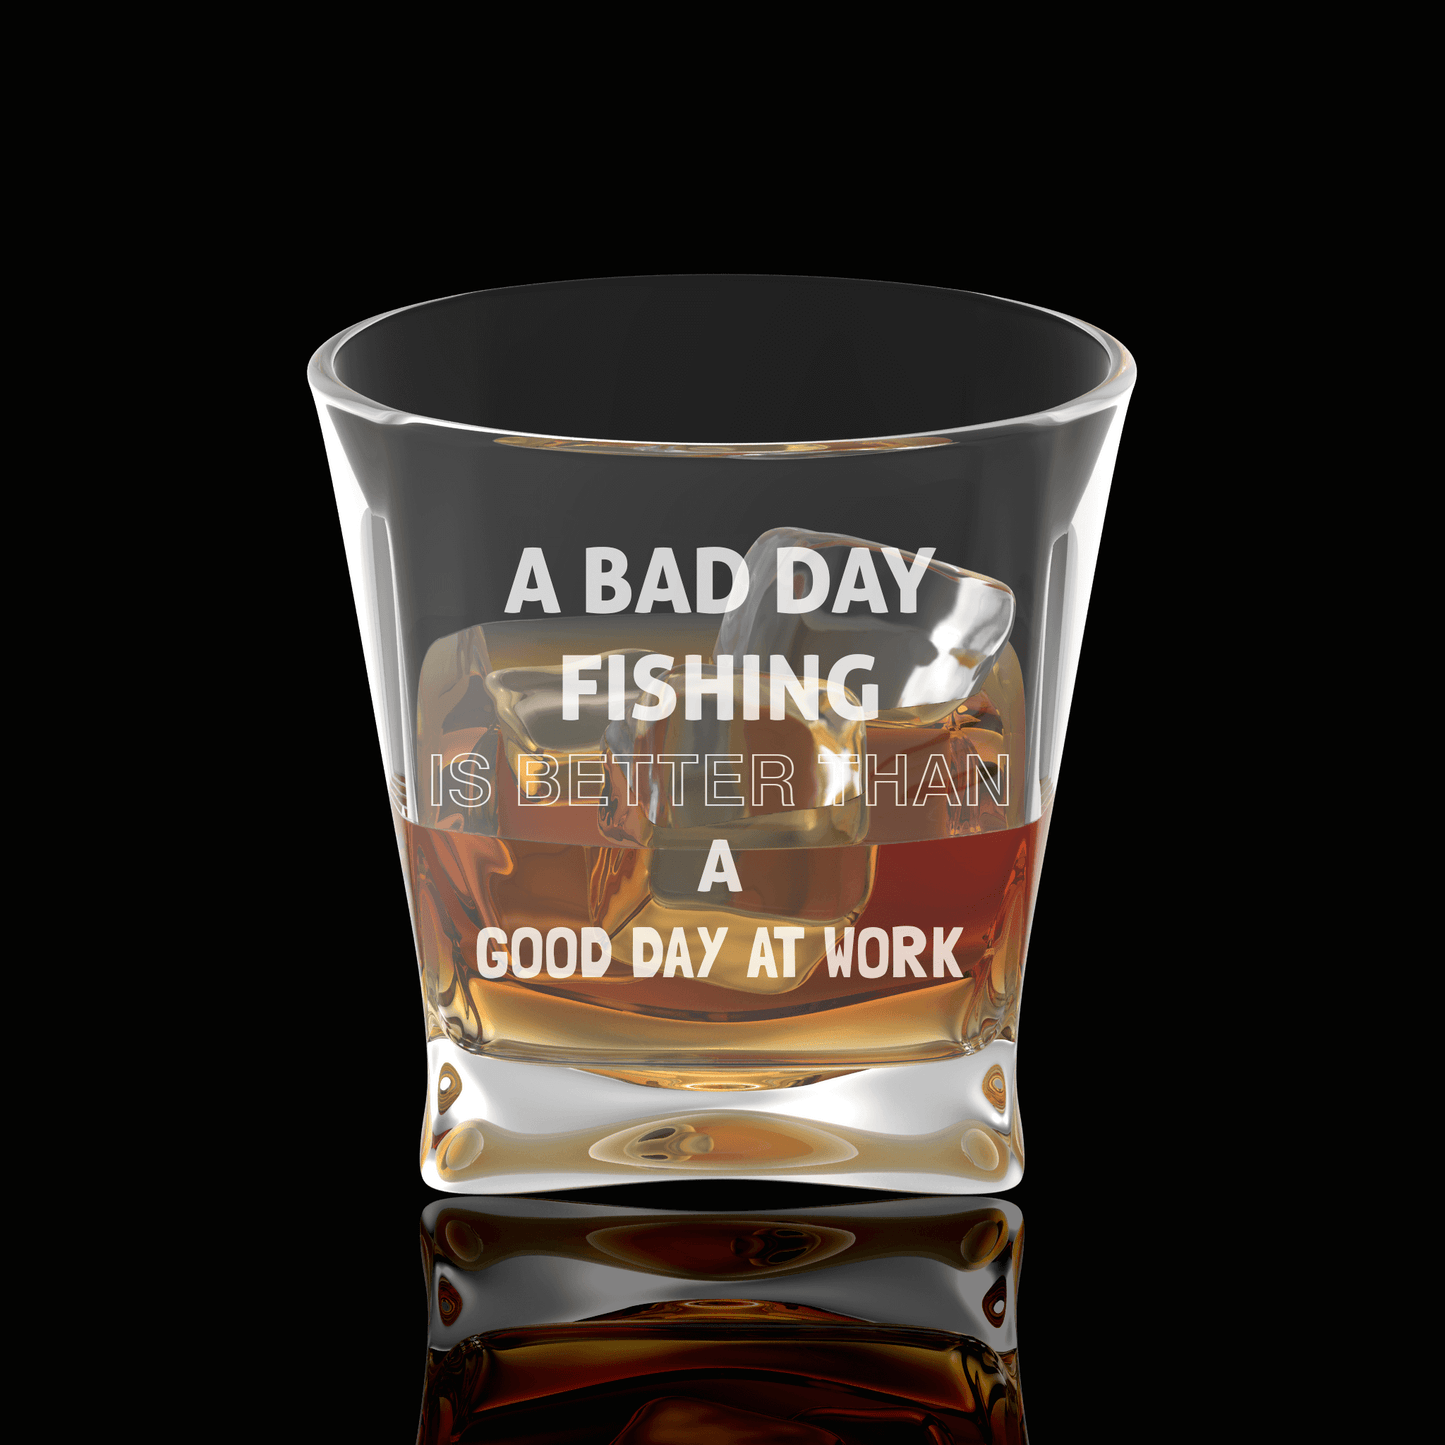 A bad day fishing is better than a good day at work - Jack Norton Fishing